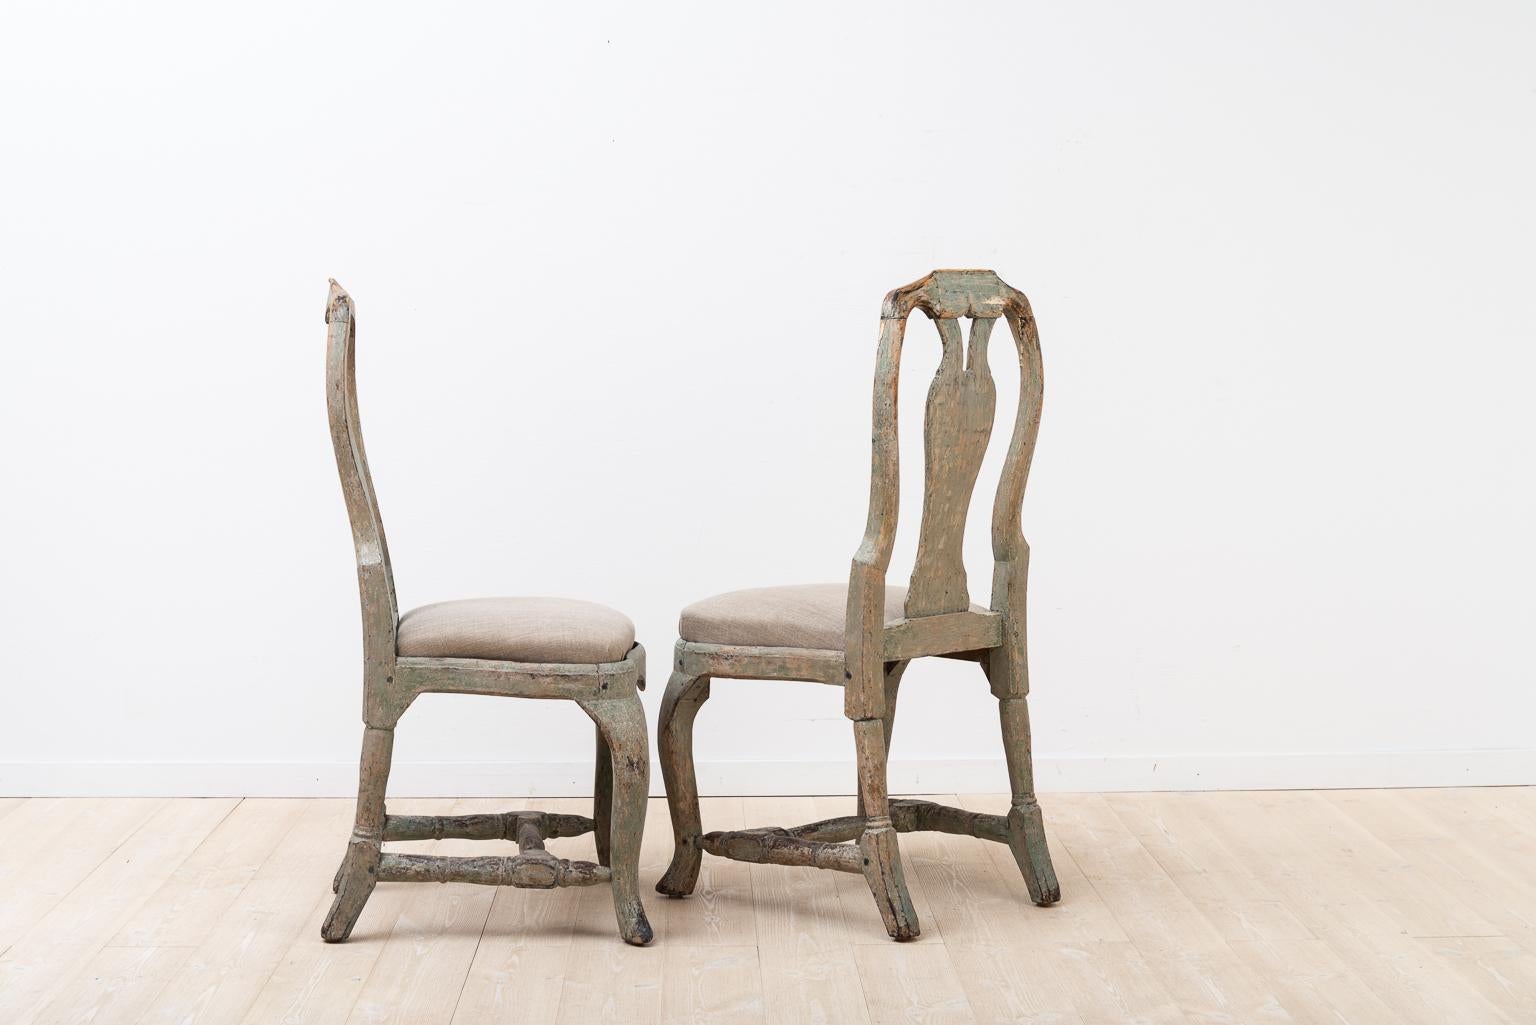 Late Baroque Pair of Chairs with Original Paint (Schwedisch)